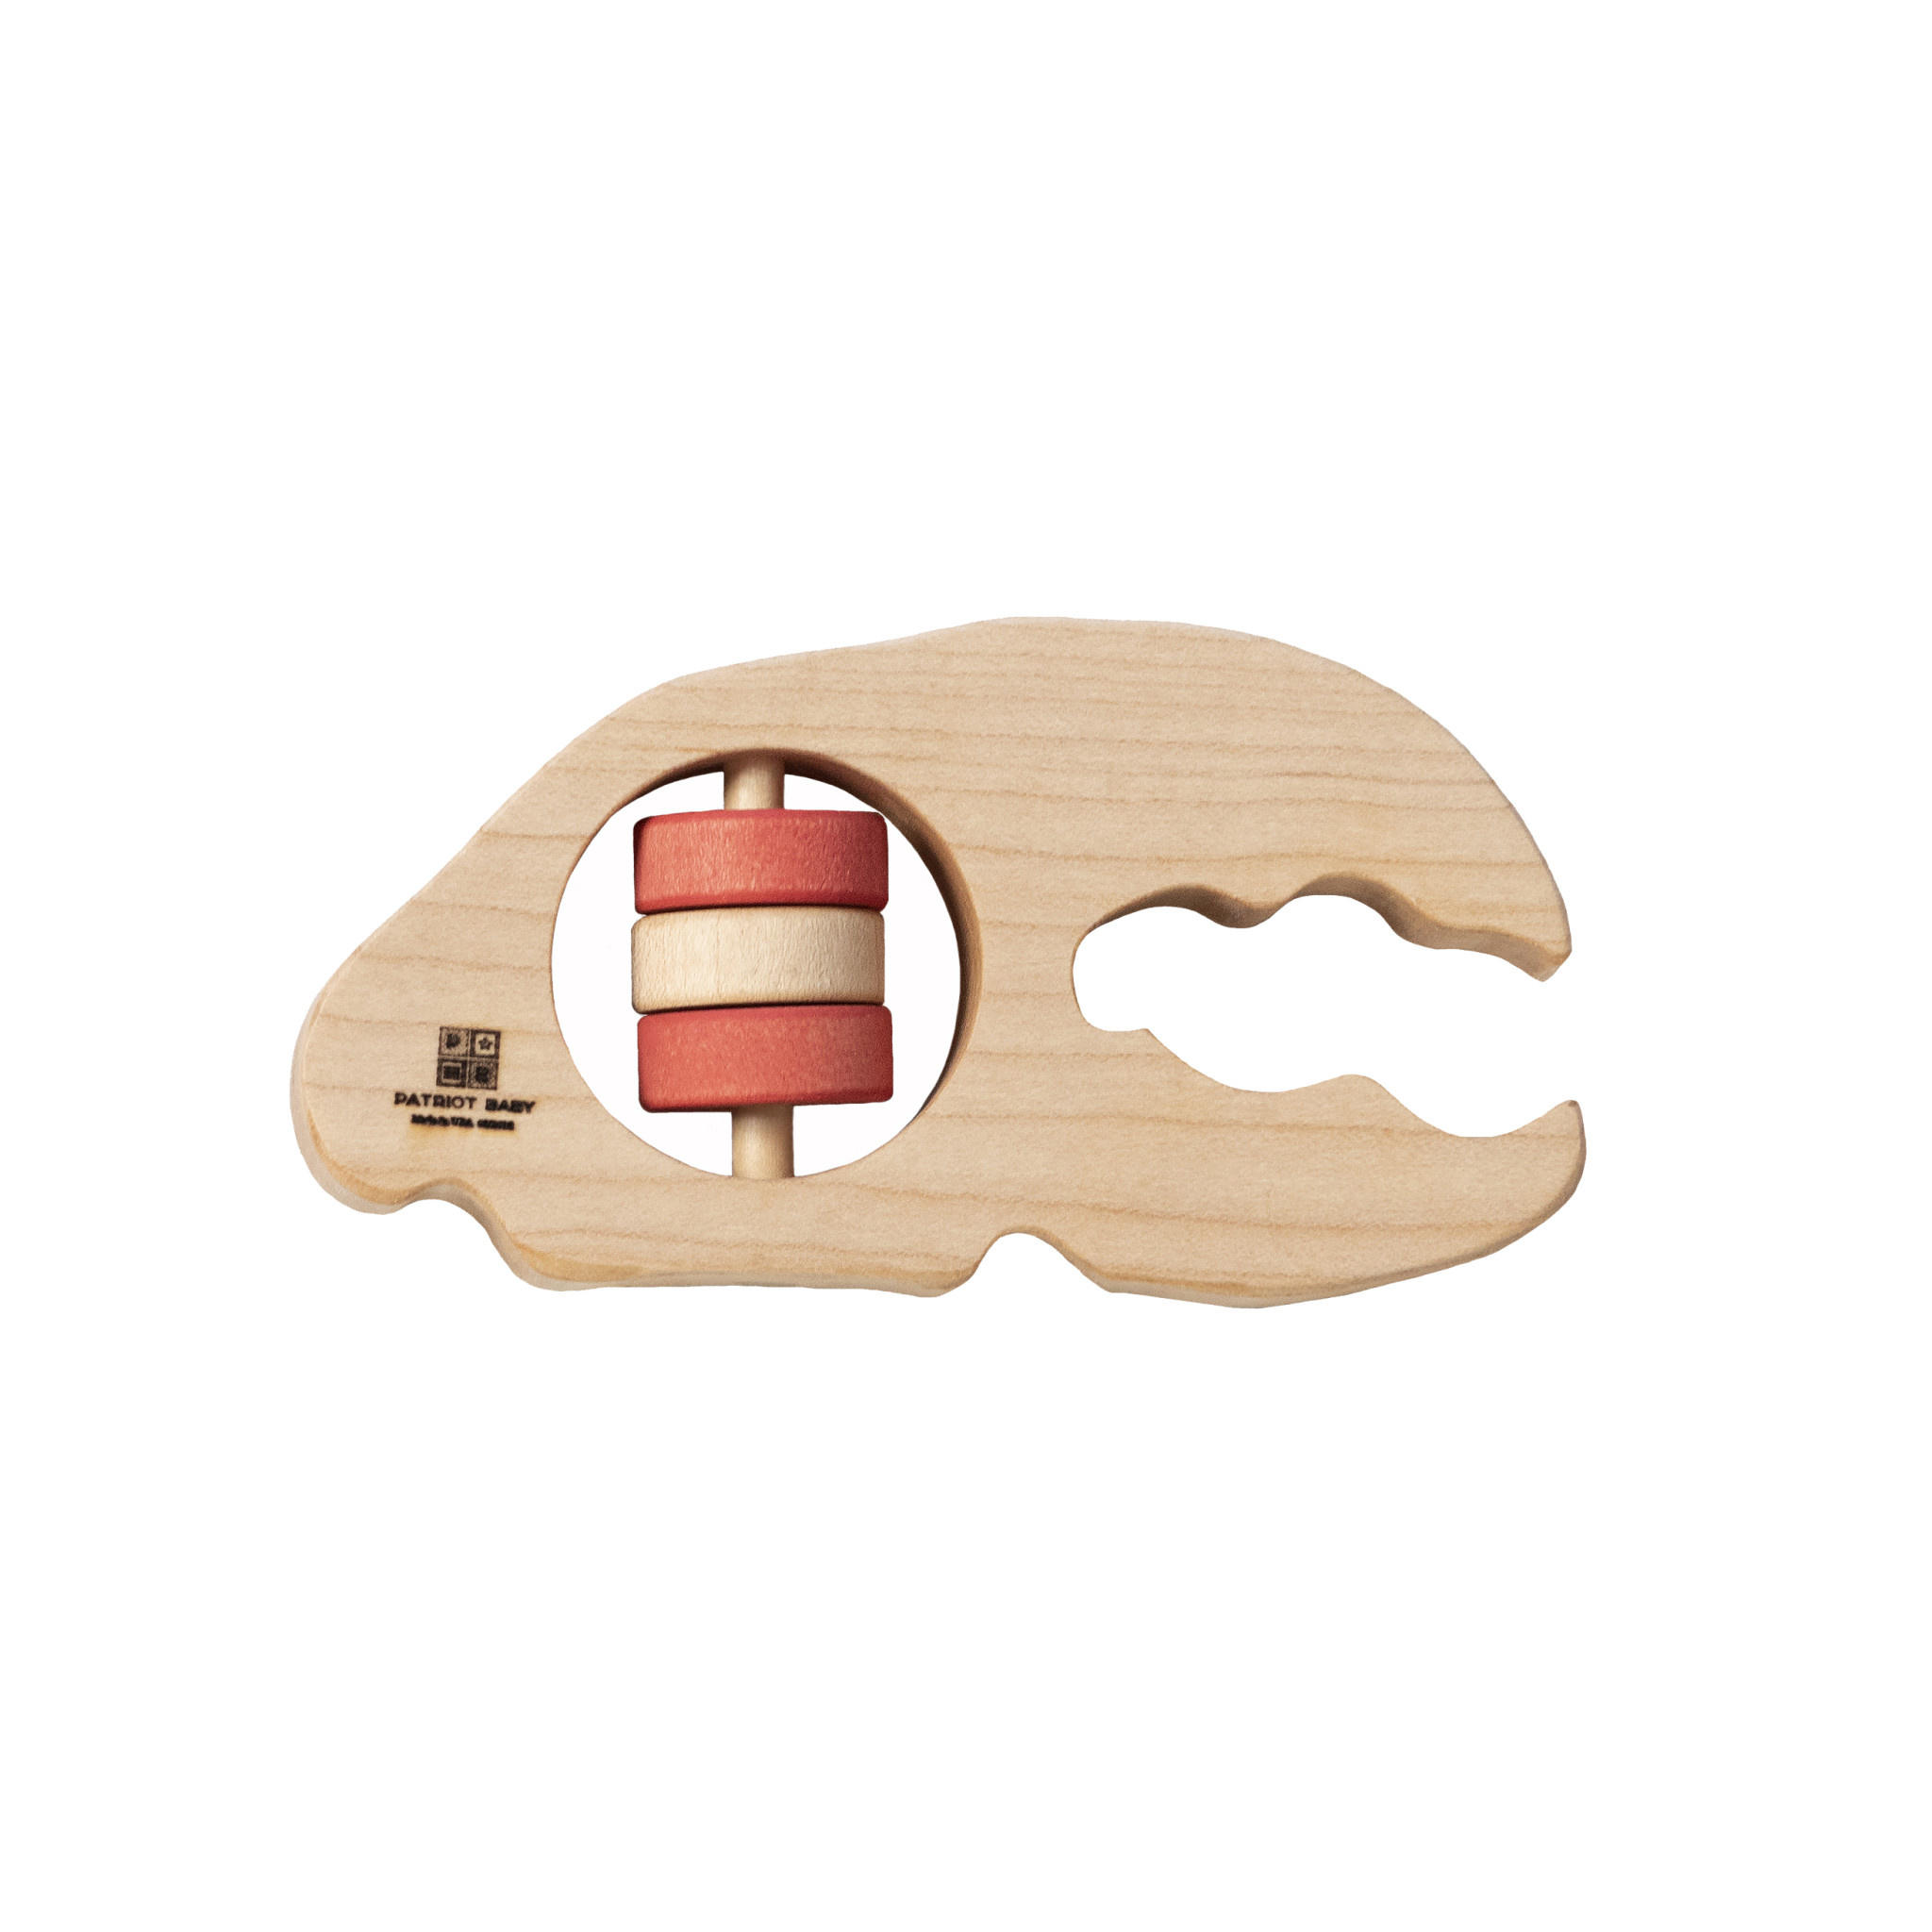 Patriot Baby Wooden Teething Rattle - Lobster Claw